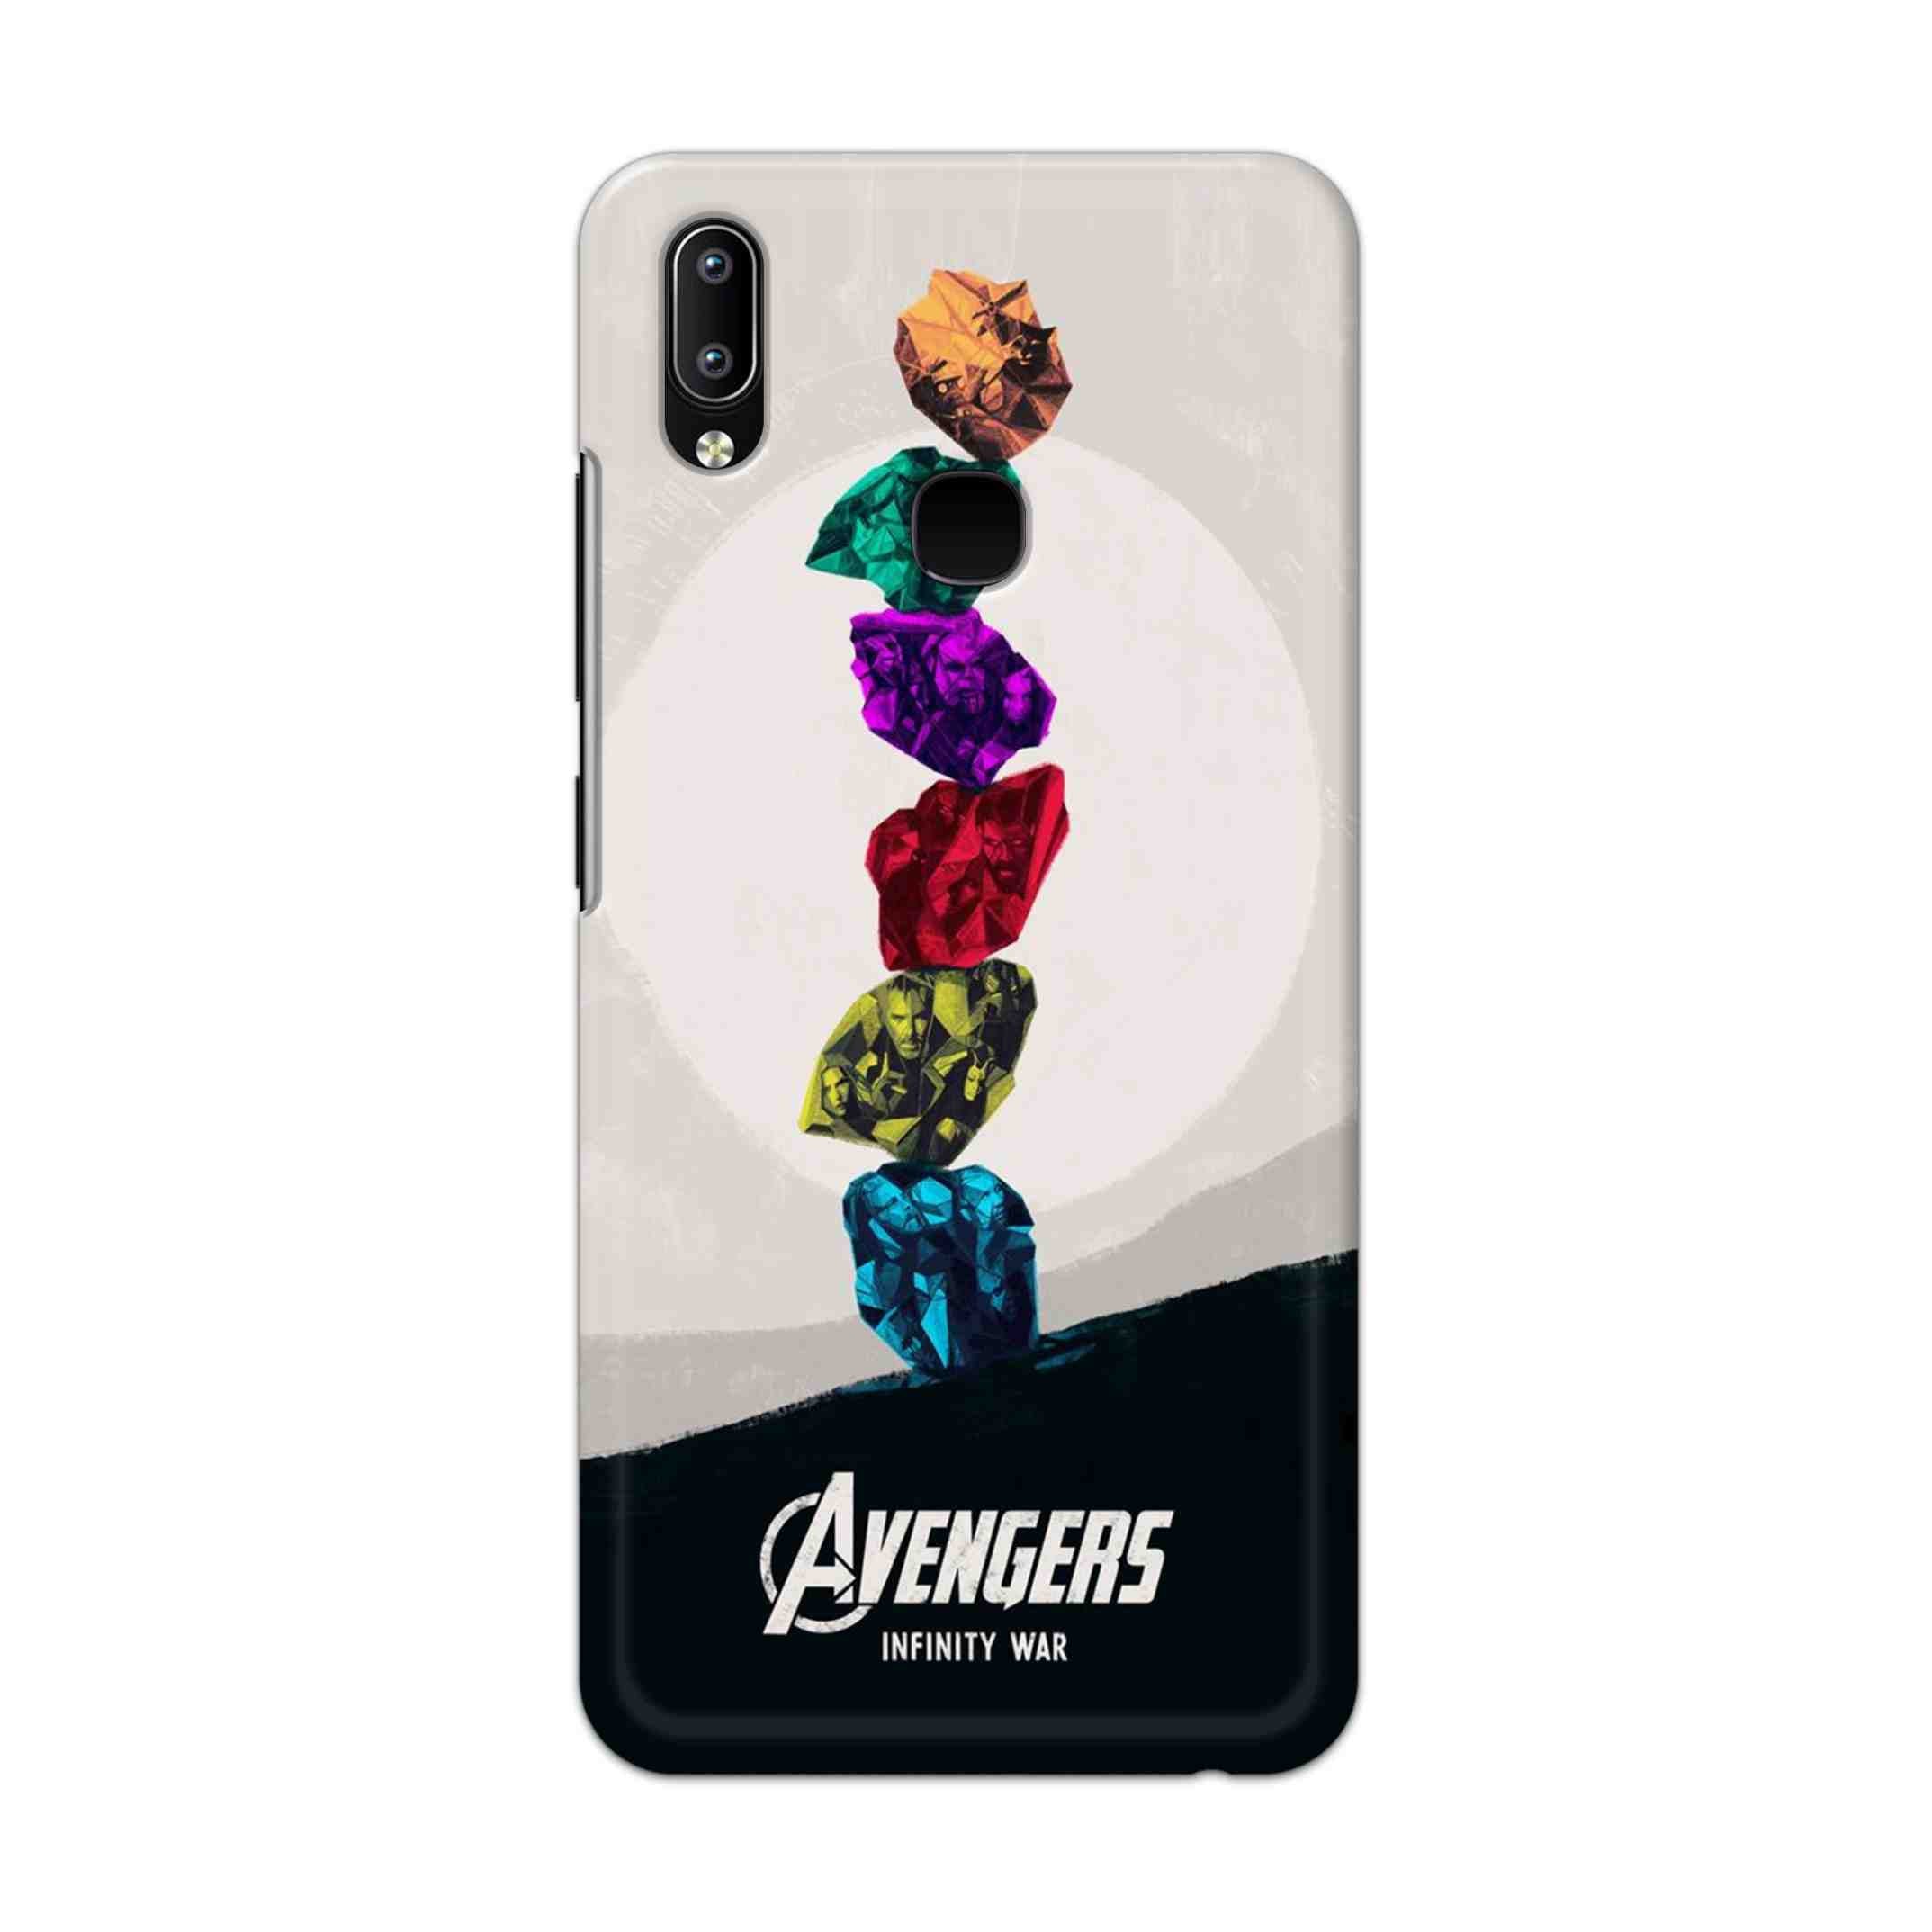 Buy Avengers Stone Hard Back Mobile Phone Case Cover For Vivo Y95 / Y93 / Y91 Online